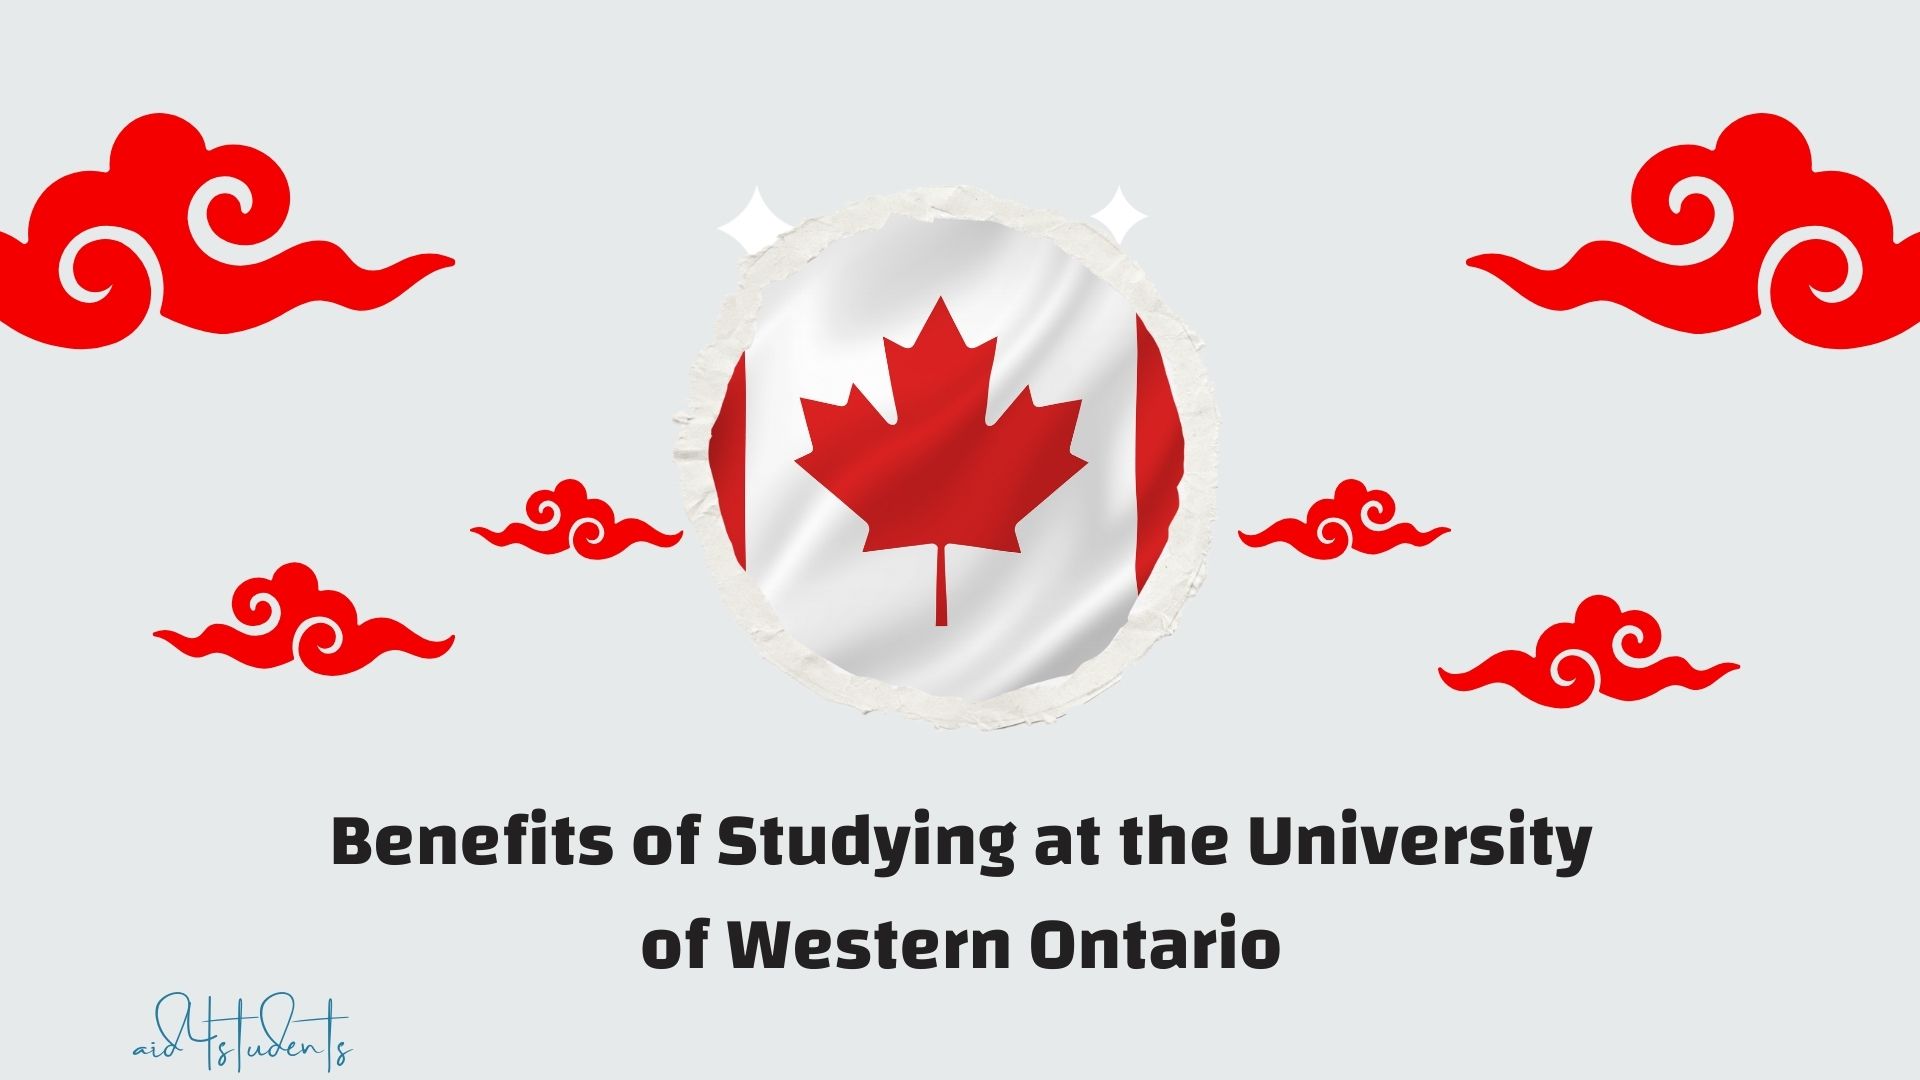 Benefits of Studying at the University of Western Ontario